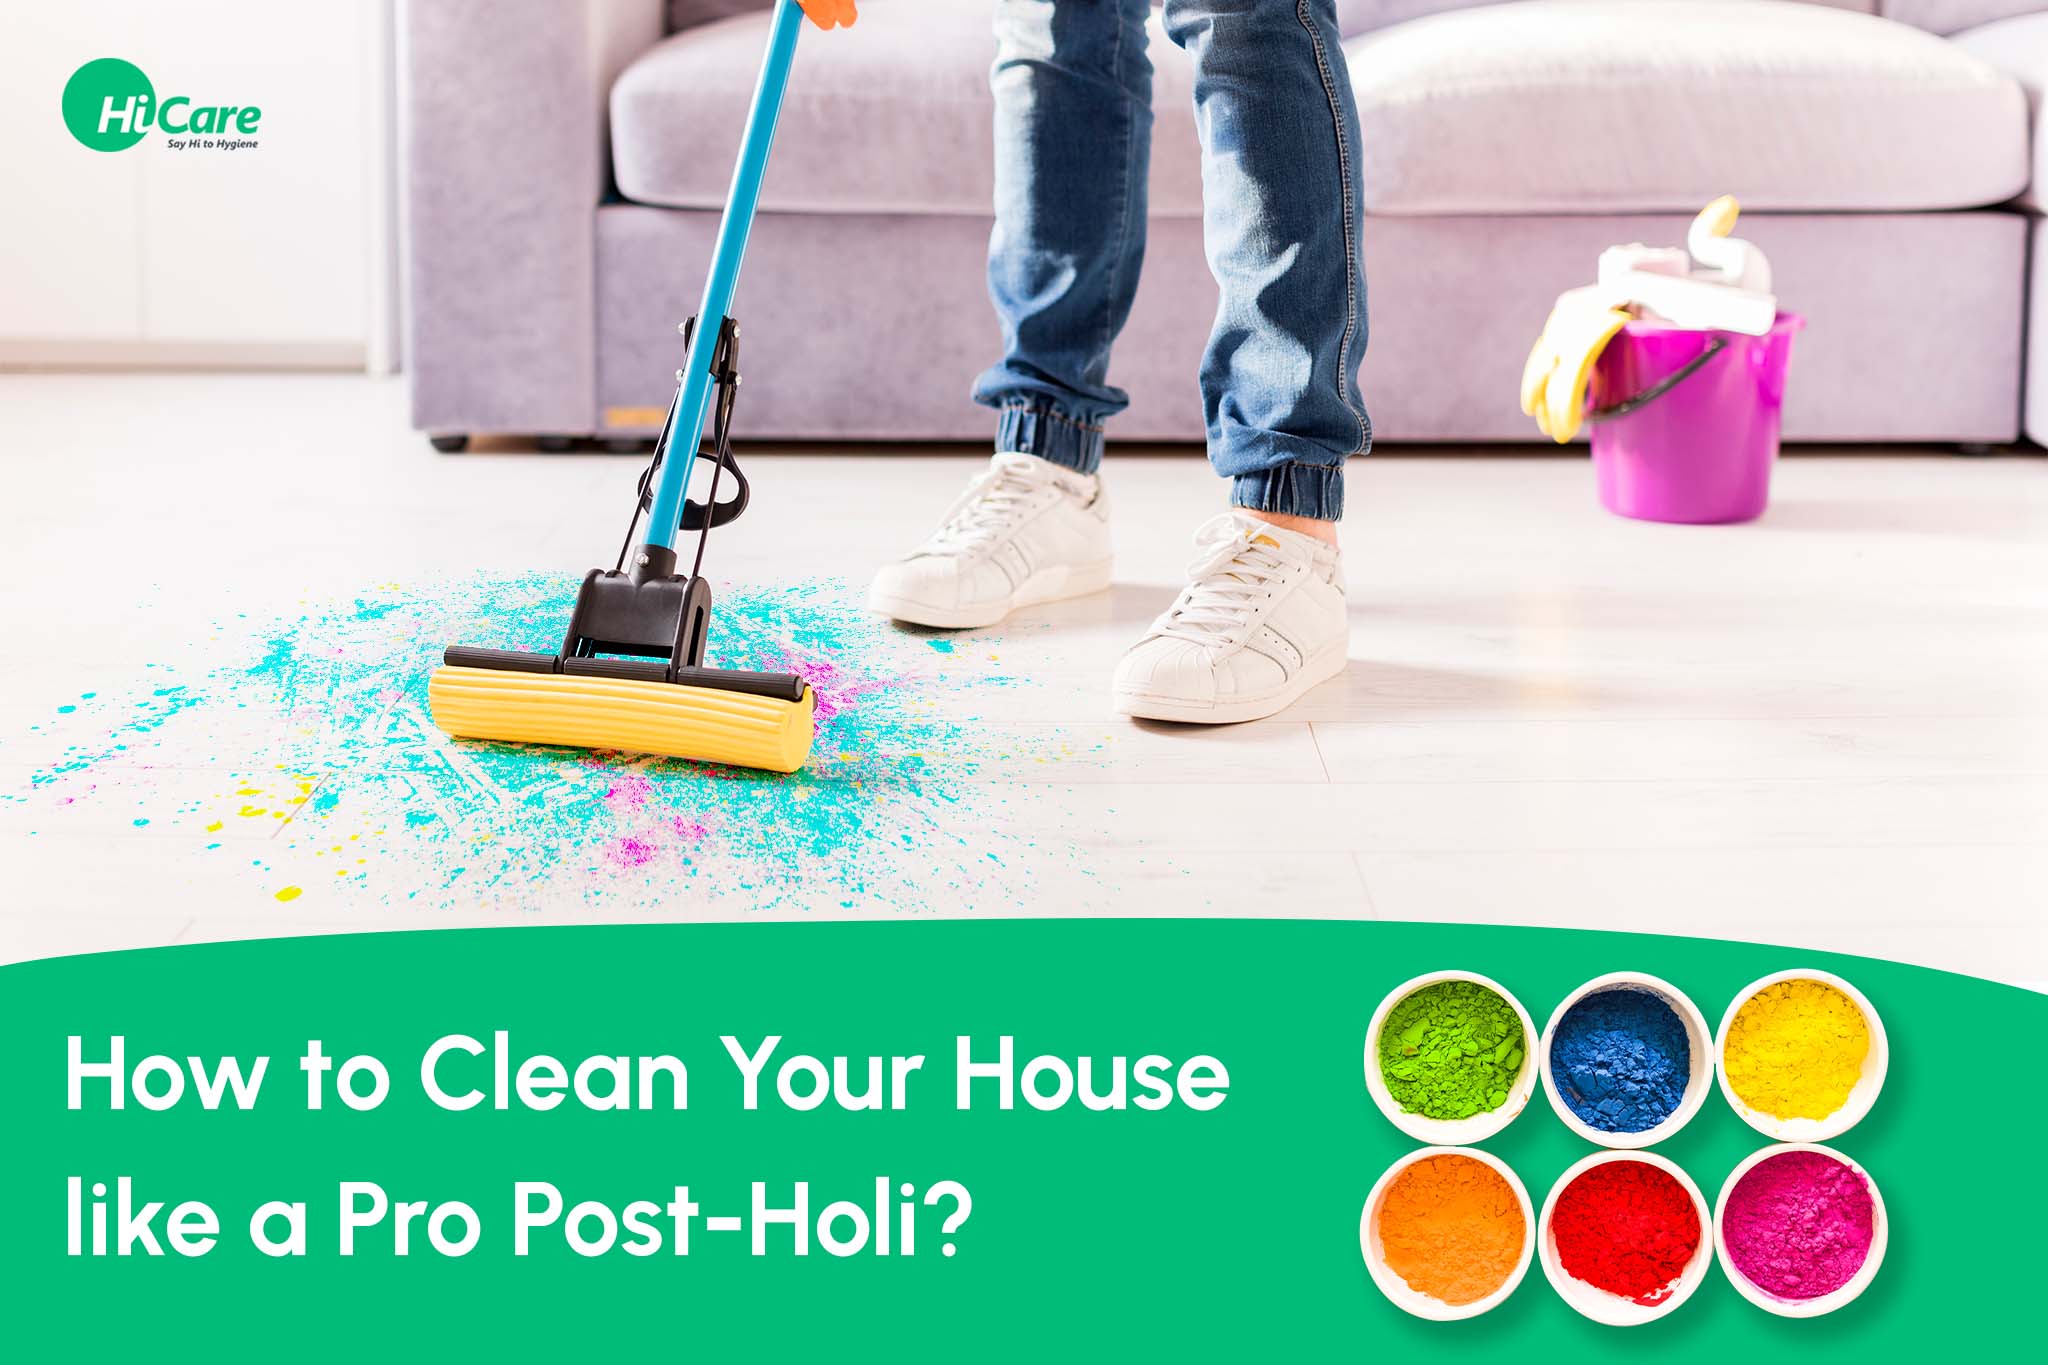 How to Clean Your House like a Pro Post-Holi?